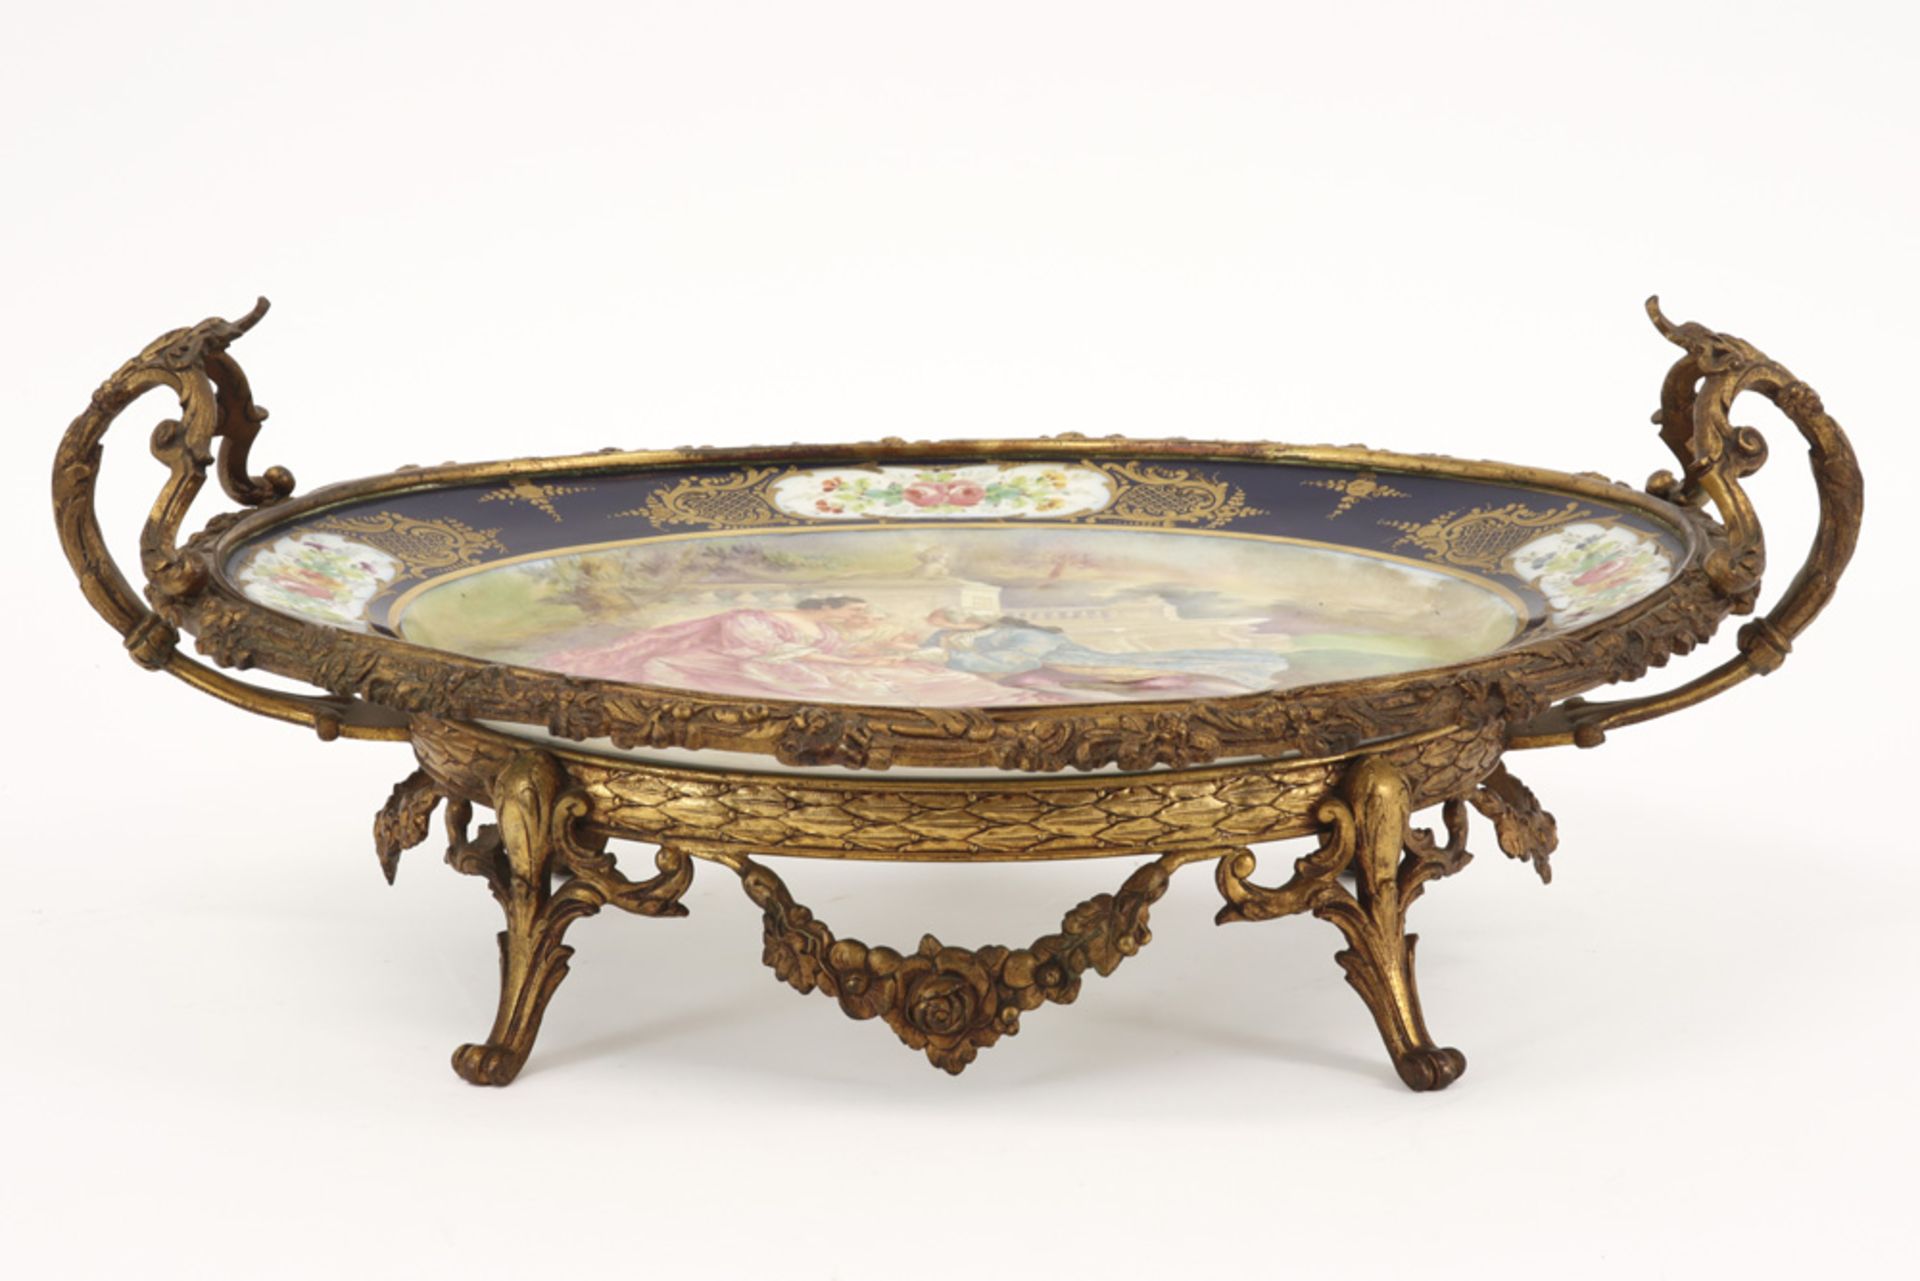 oval dish in Sèvres marked porcelain with paintings, signed Rochette, and with mounting in gilded